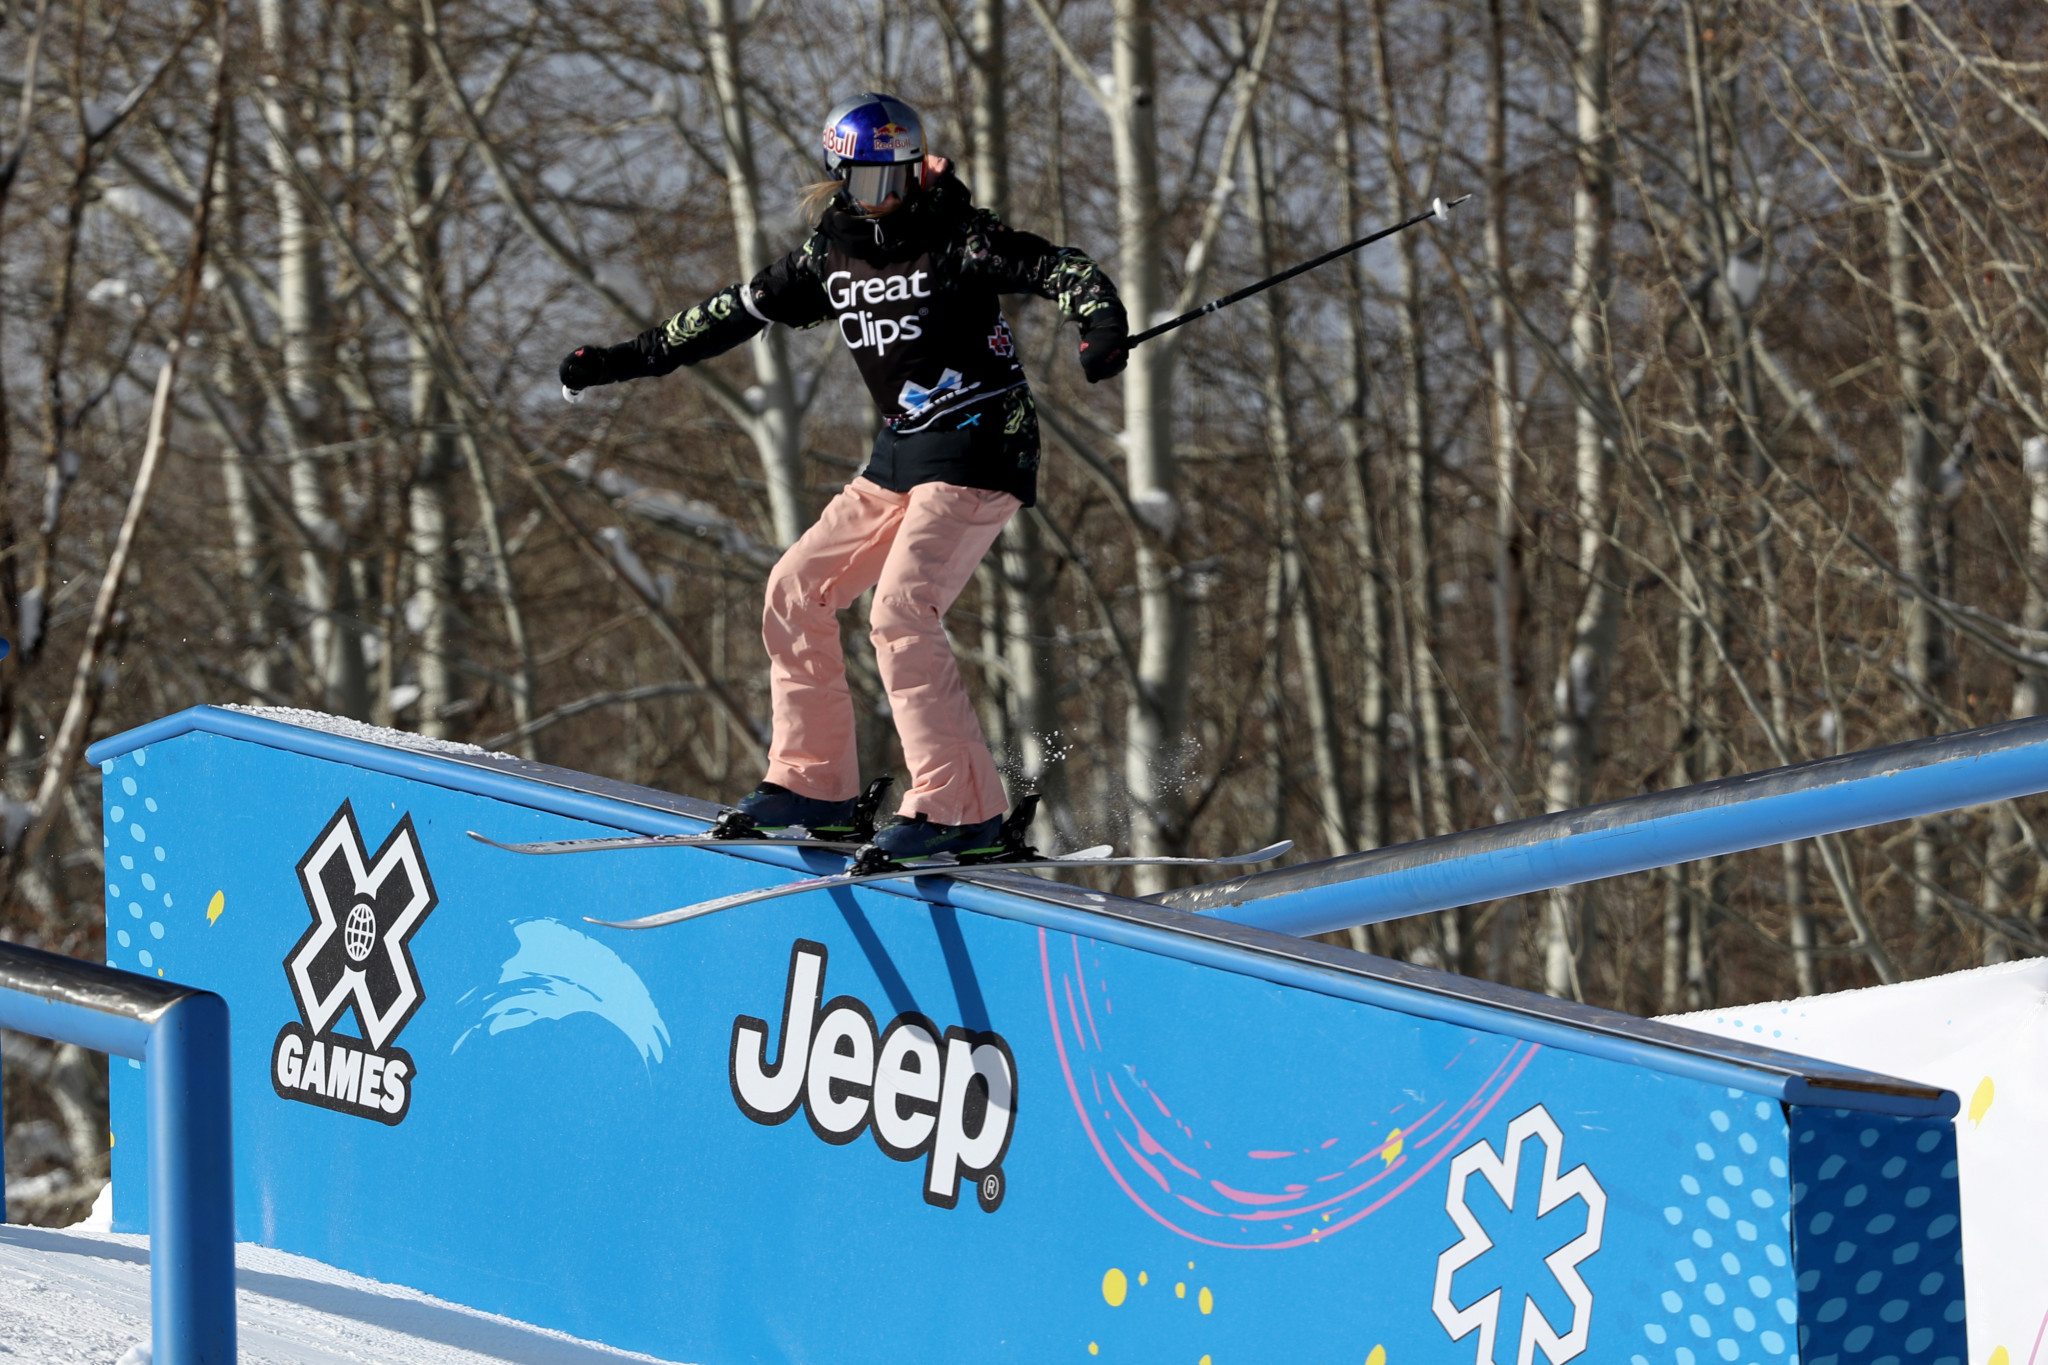 Sildaru wins two medals on second day of Winter X Games in Aspen